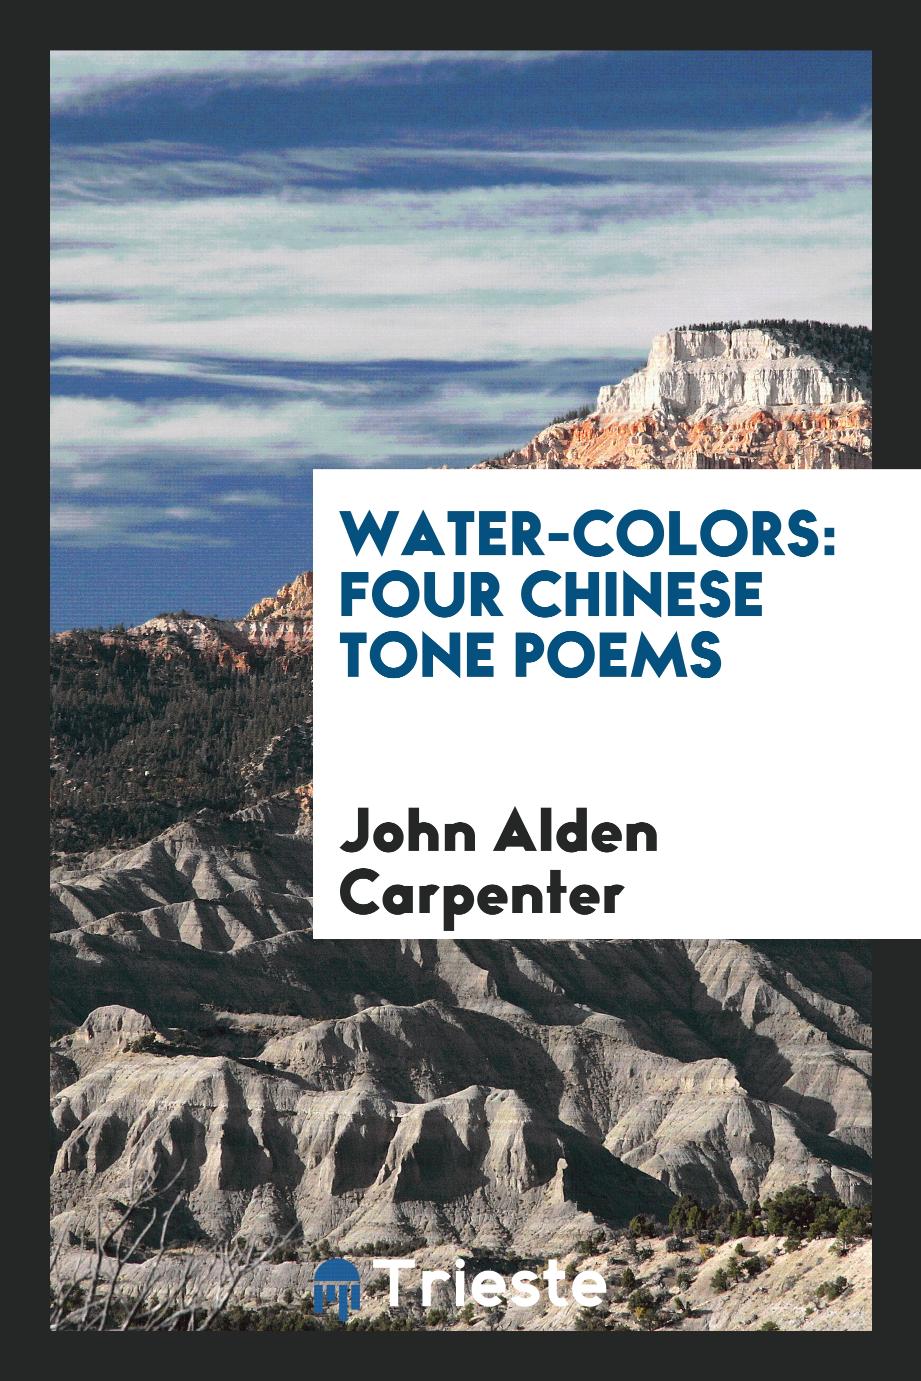 Water-colors: Four Chinese Tone Poems